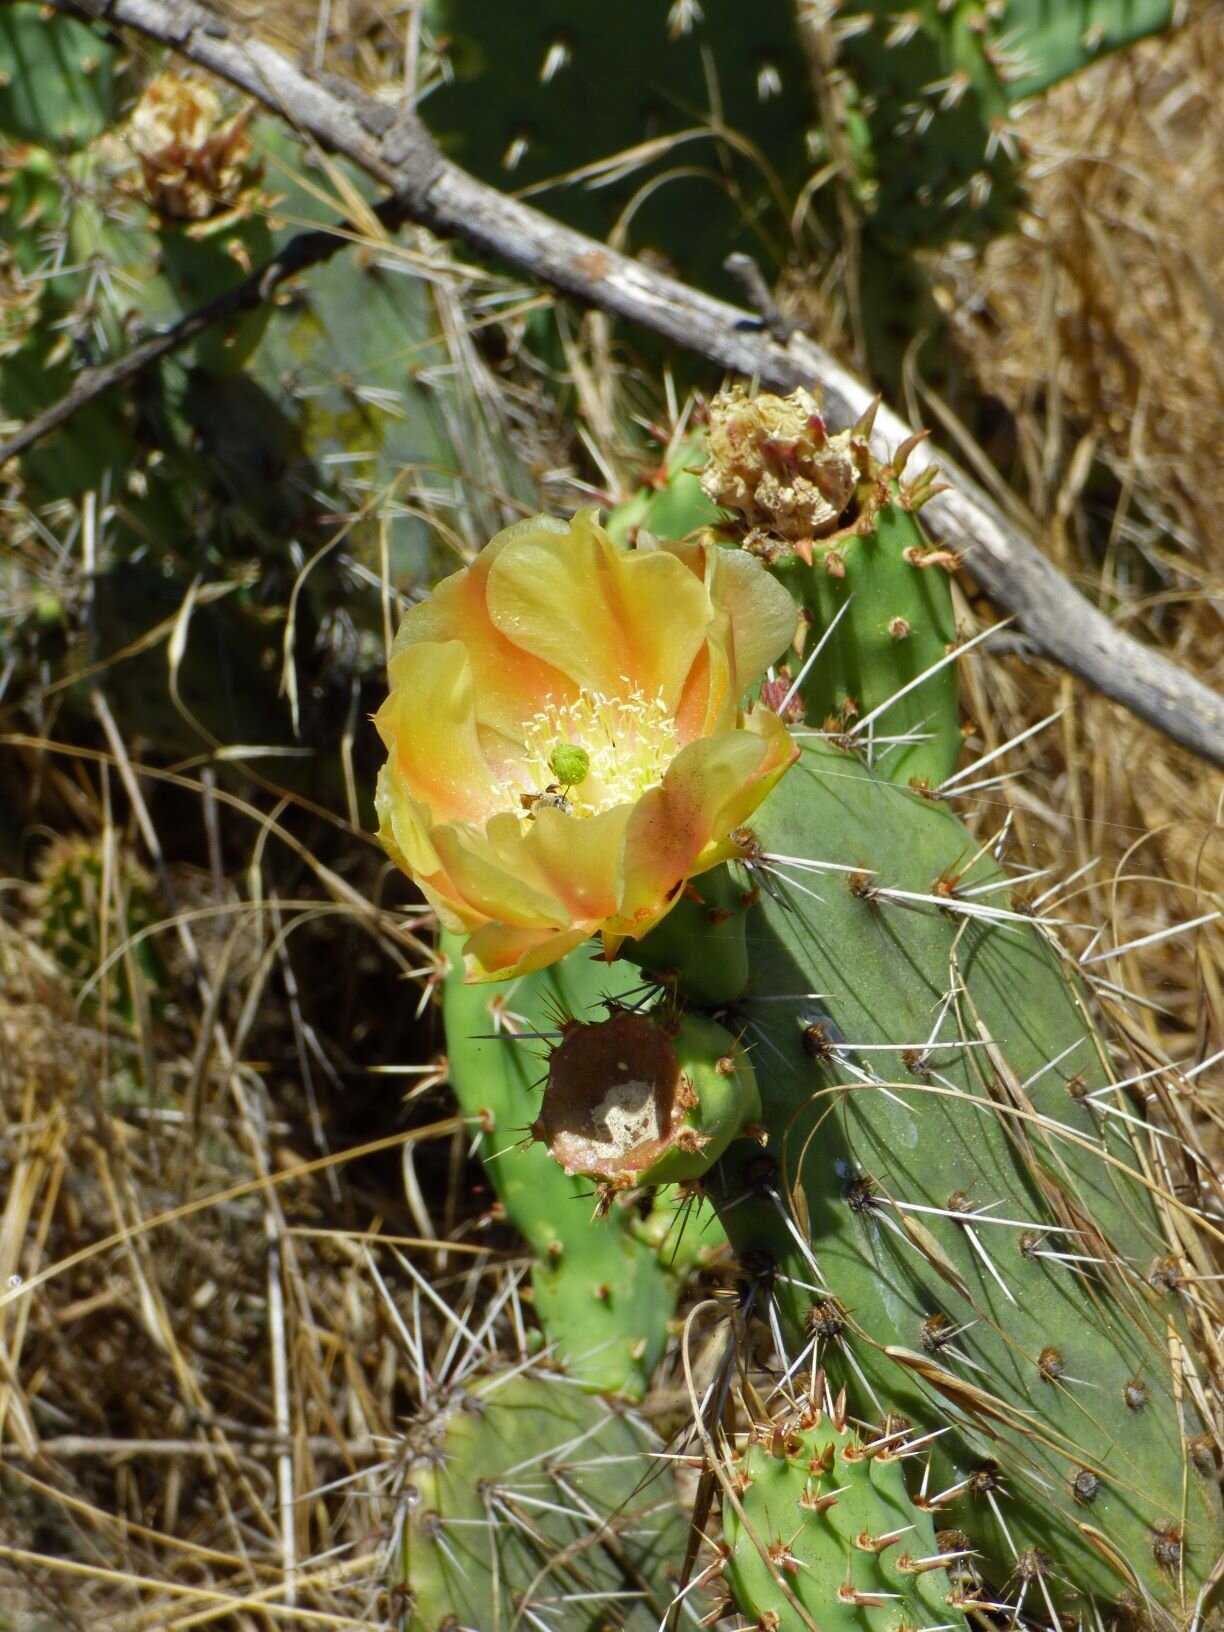 On the way back to the parking lot, a few Coast Prickly Pear (Opuntia littoralis)